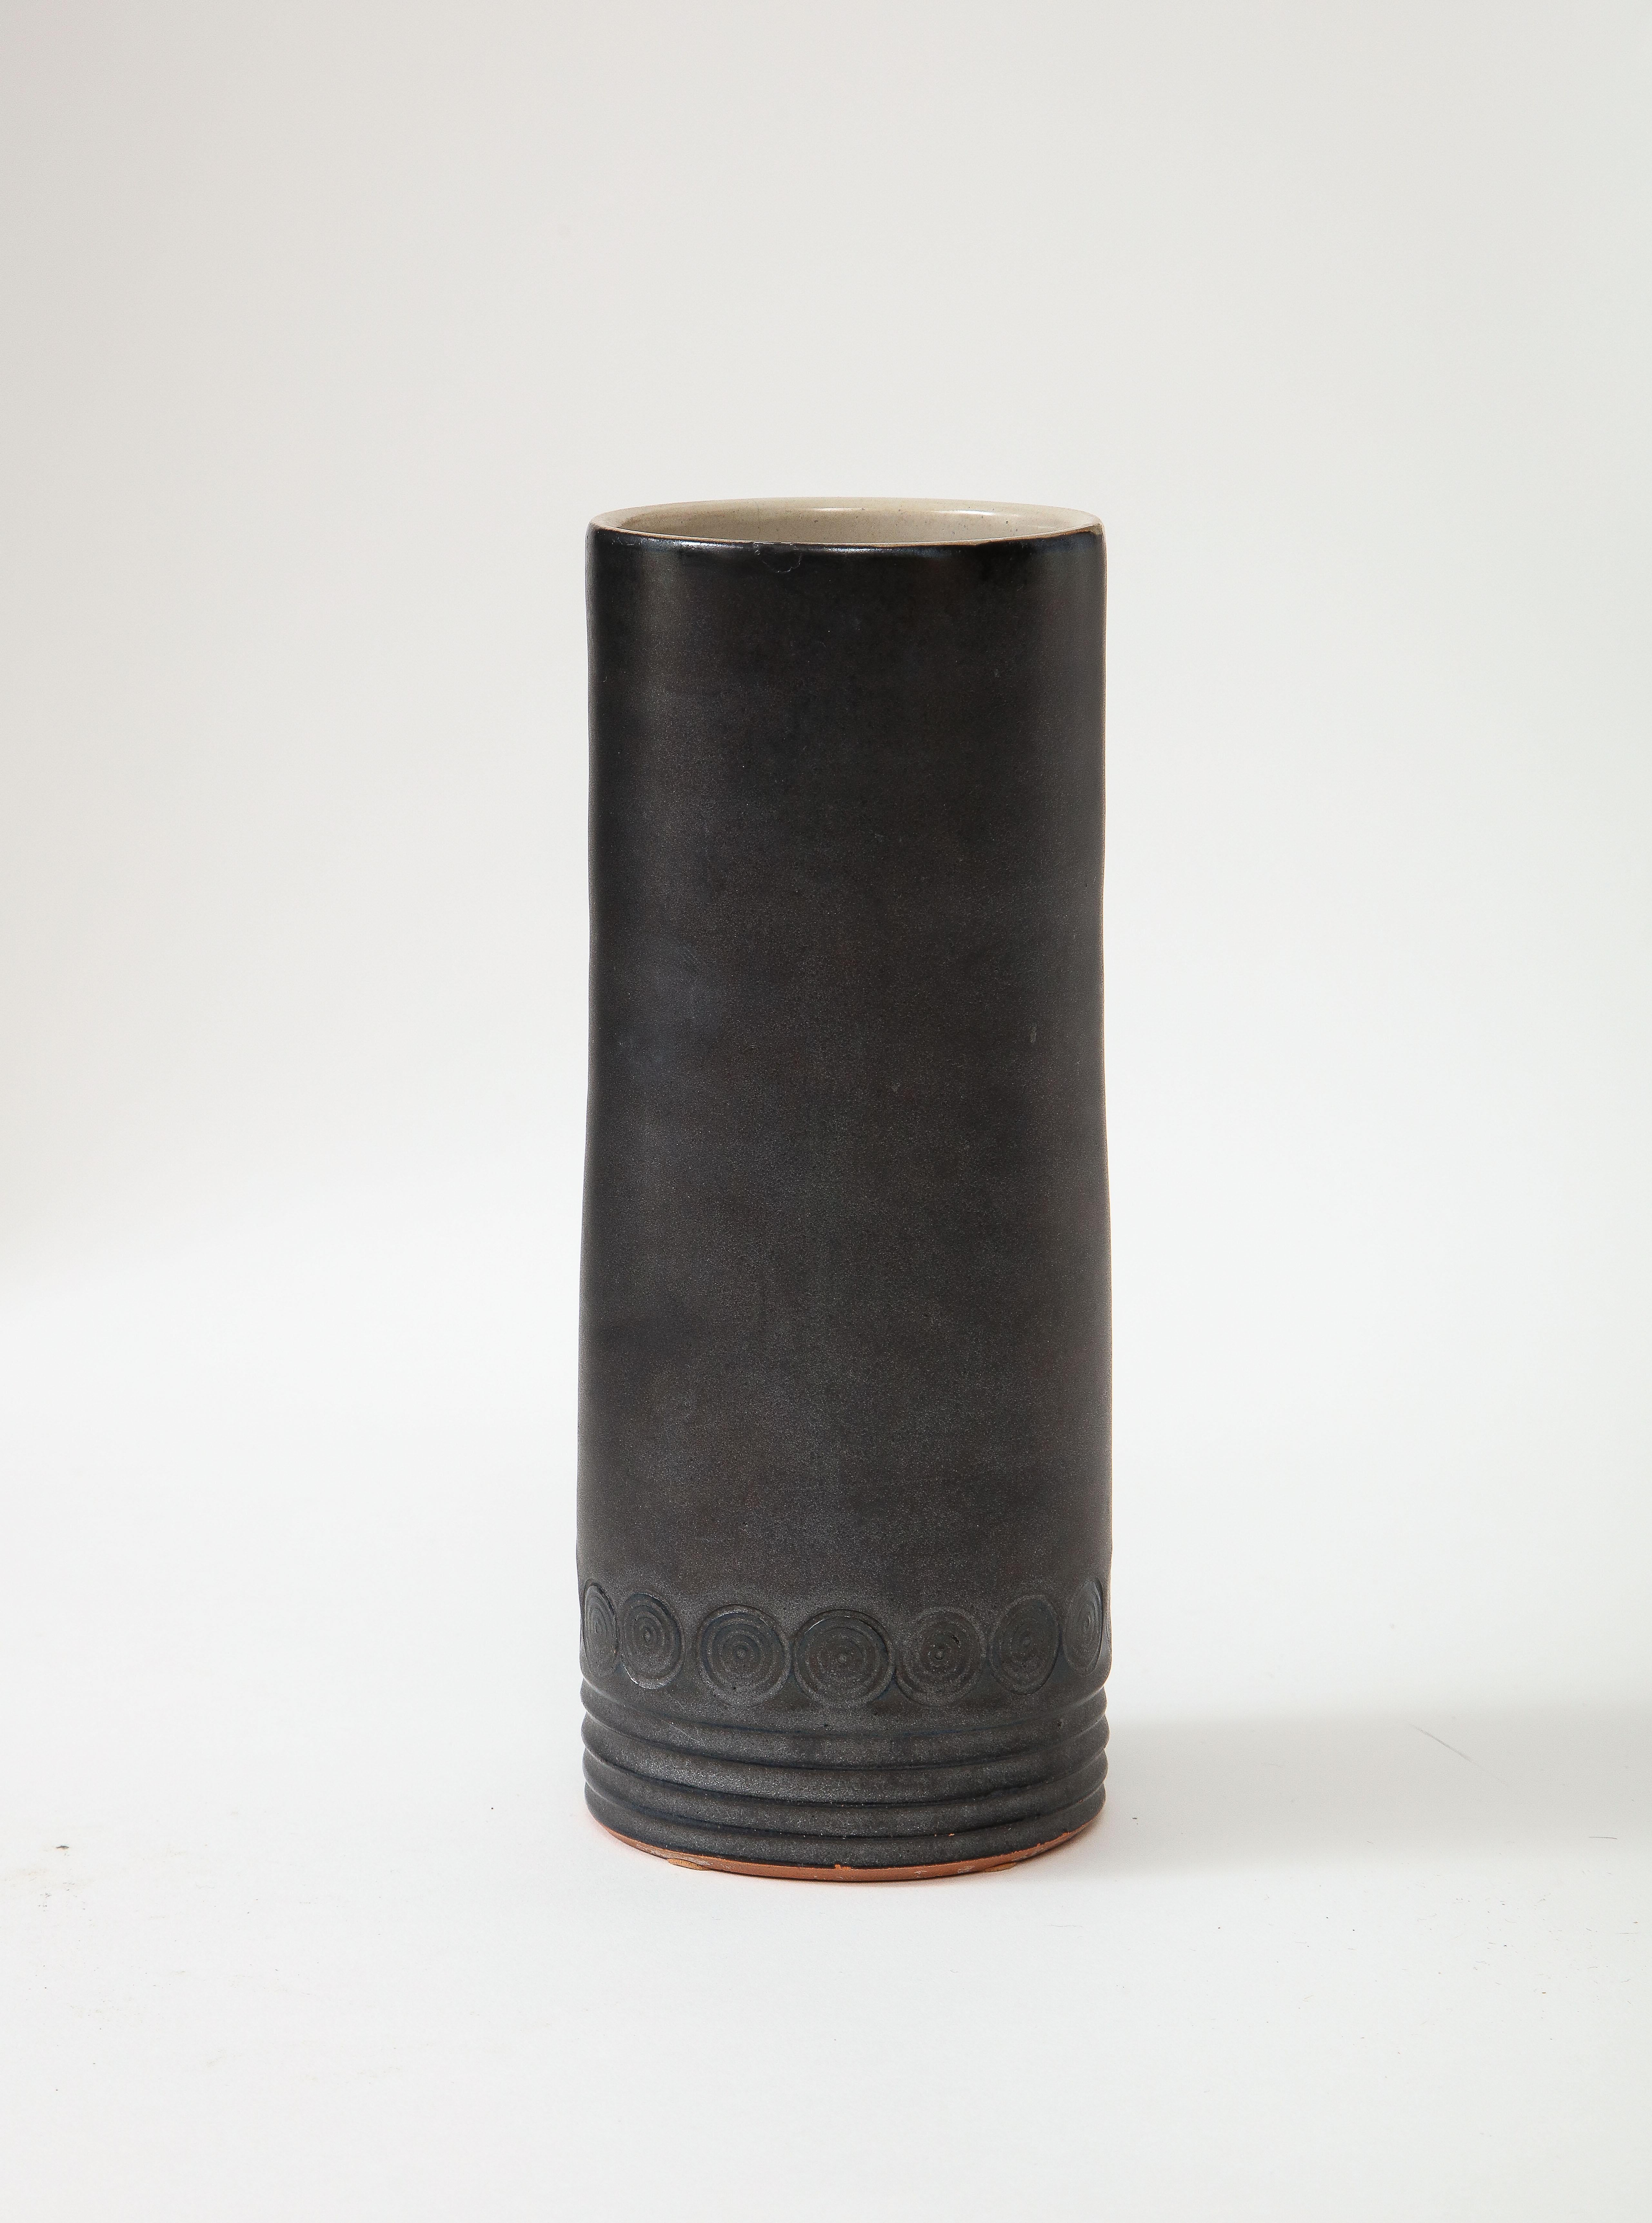 Black Vase with White Interior, Incised Circle & Line Decoration, France, c. 195 For Sale 2